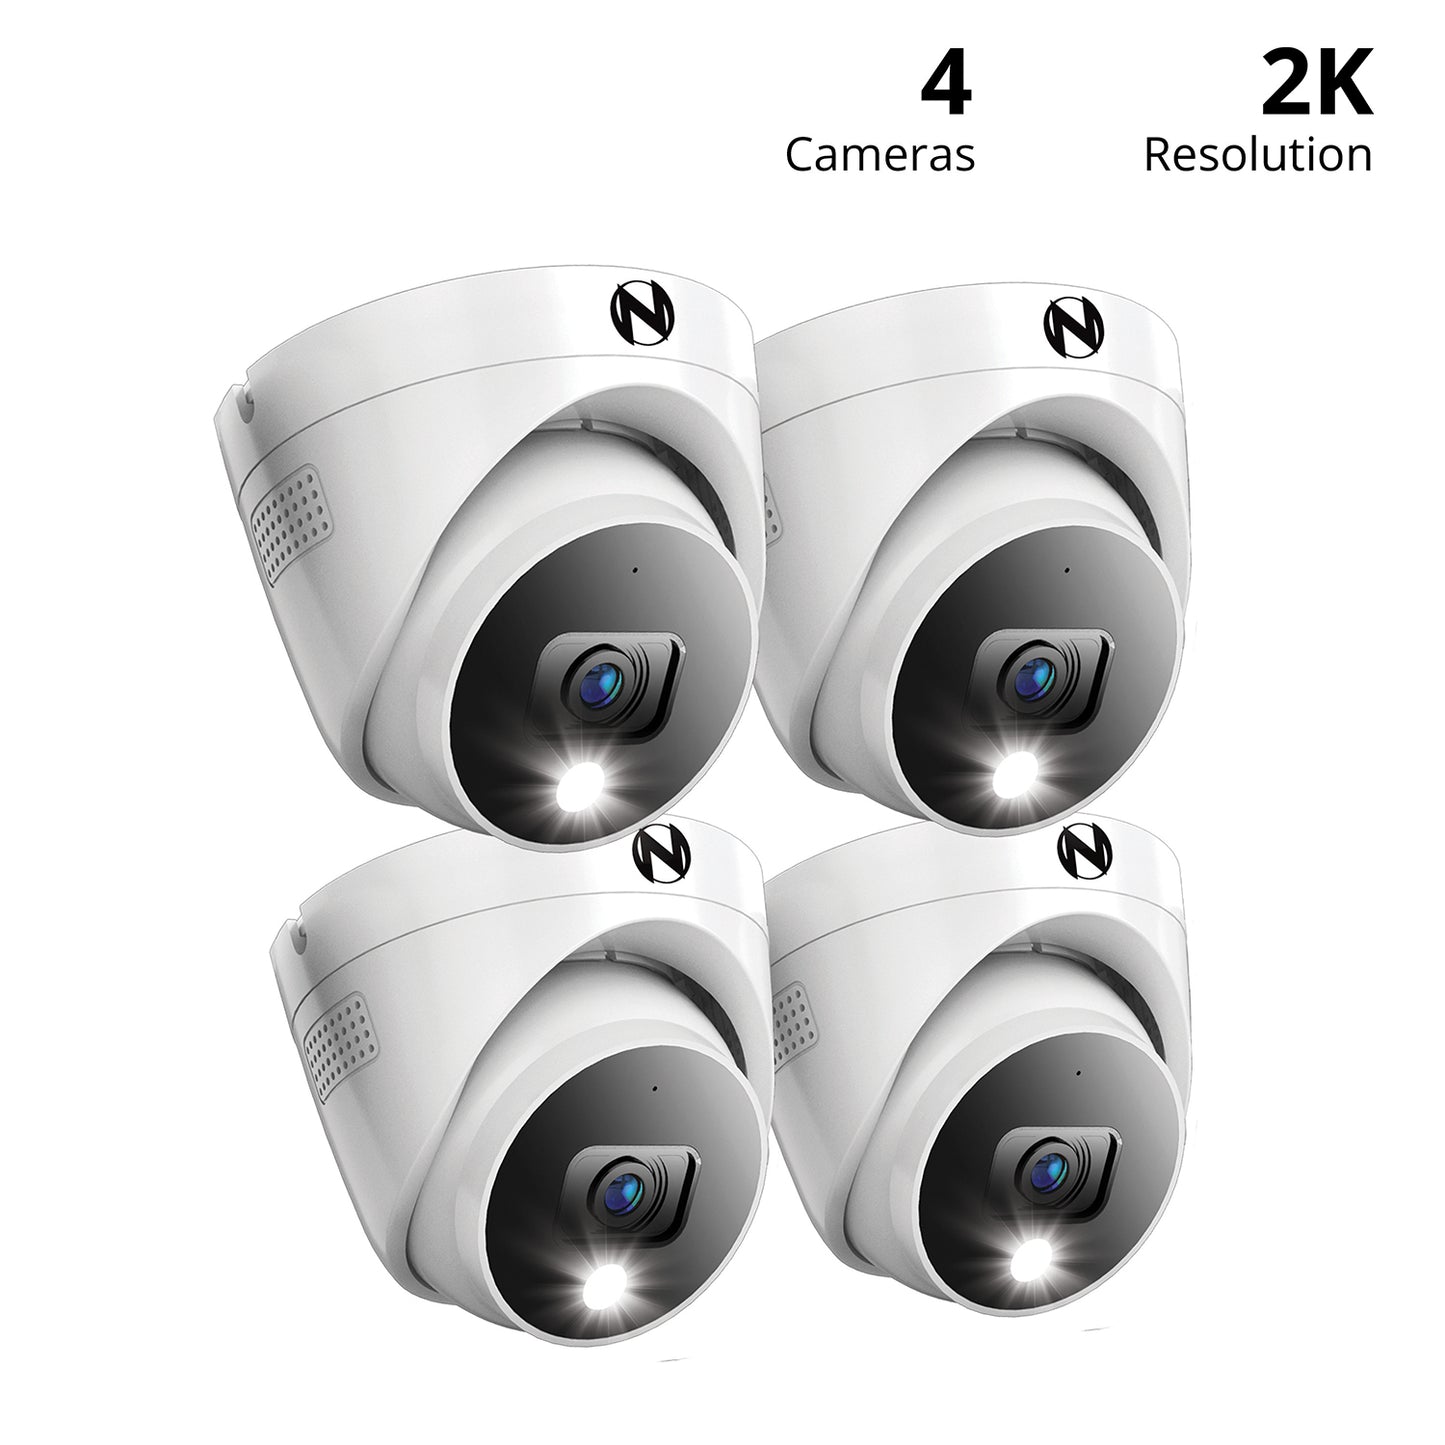 Add On Wired 2K Deterrence Dome Cameras with 2-Way Audio - 4 Pack - White